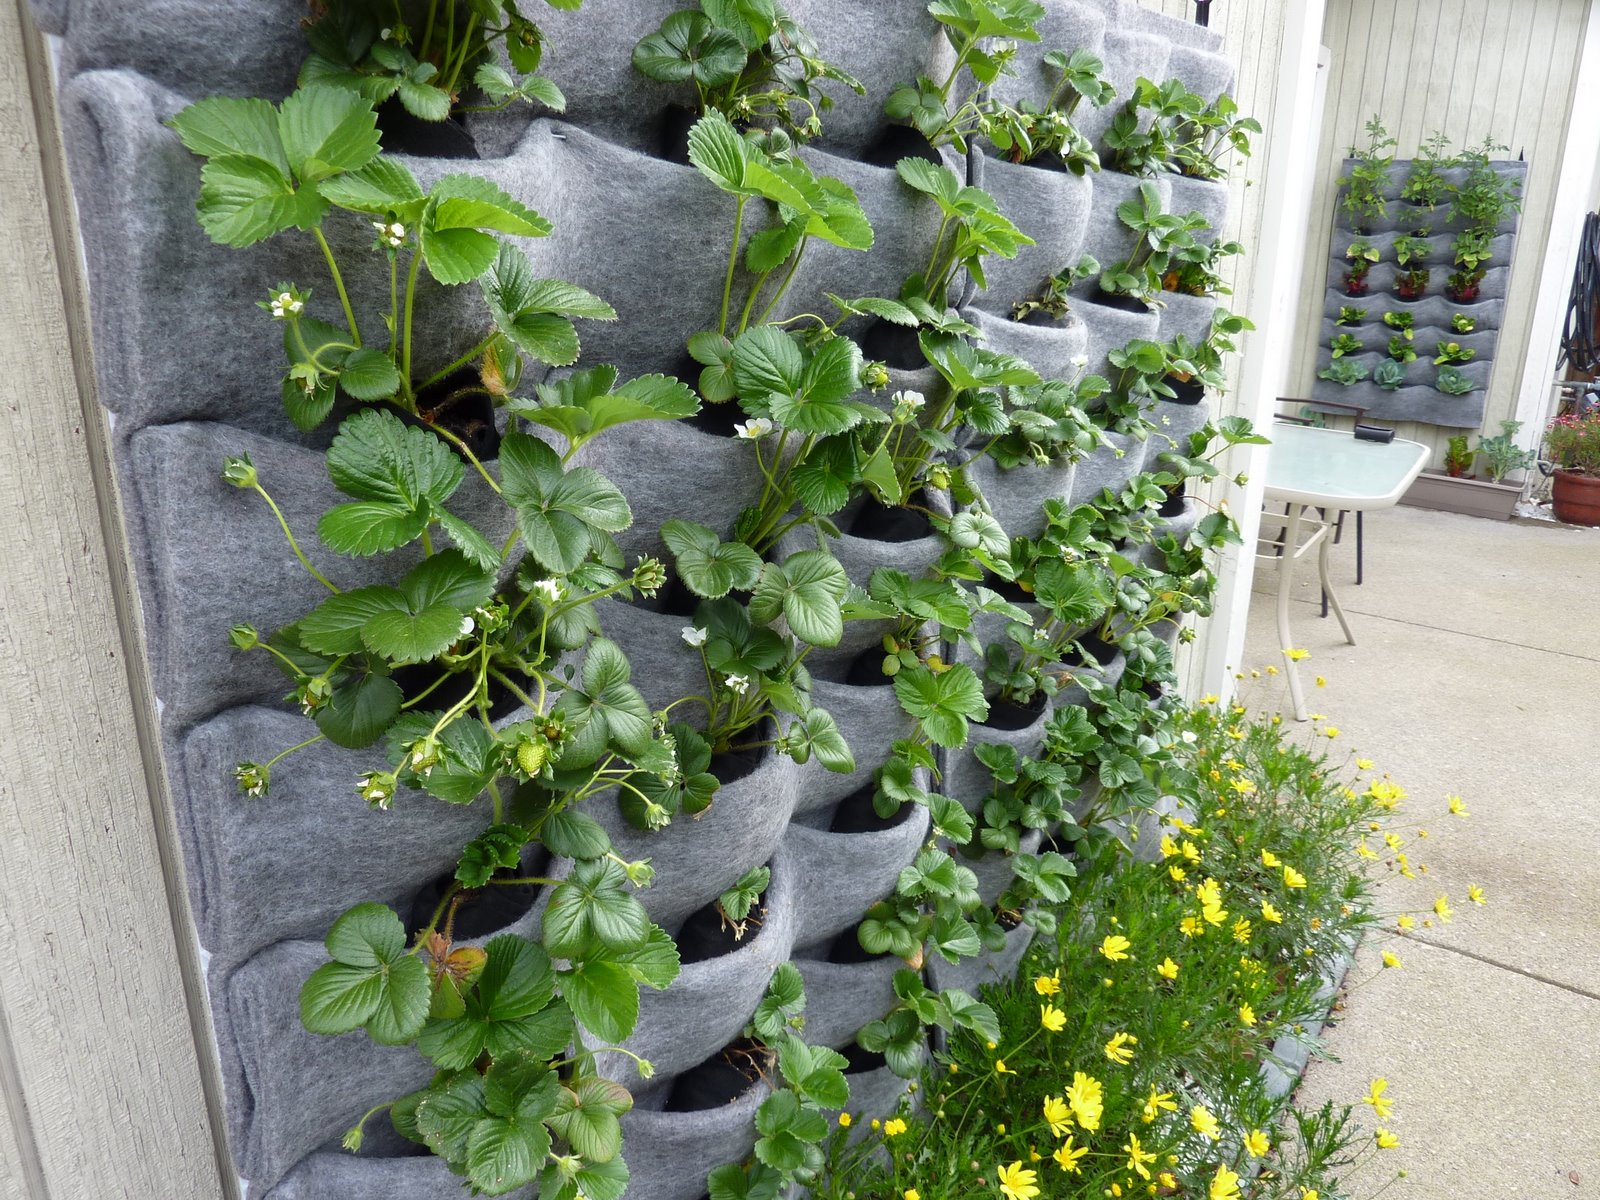 Plants On Walls vertical garden systems: Harvest Walls Growing In1600 x 1200